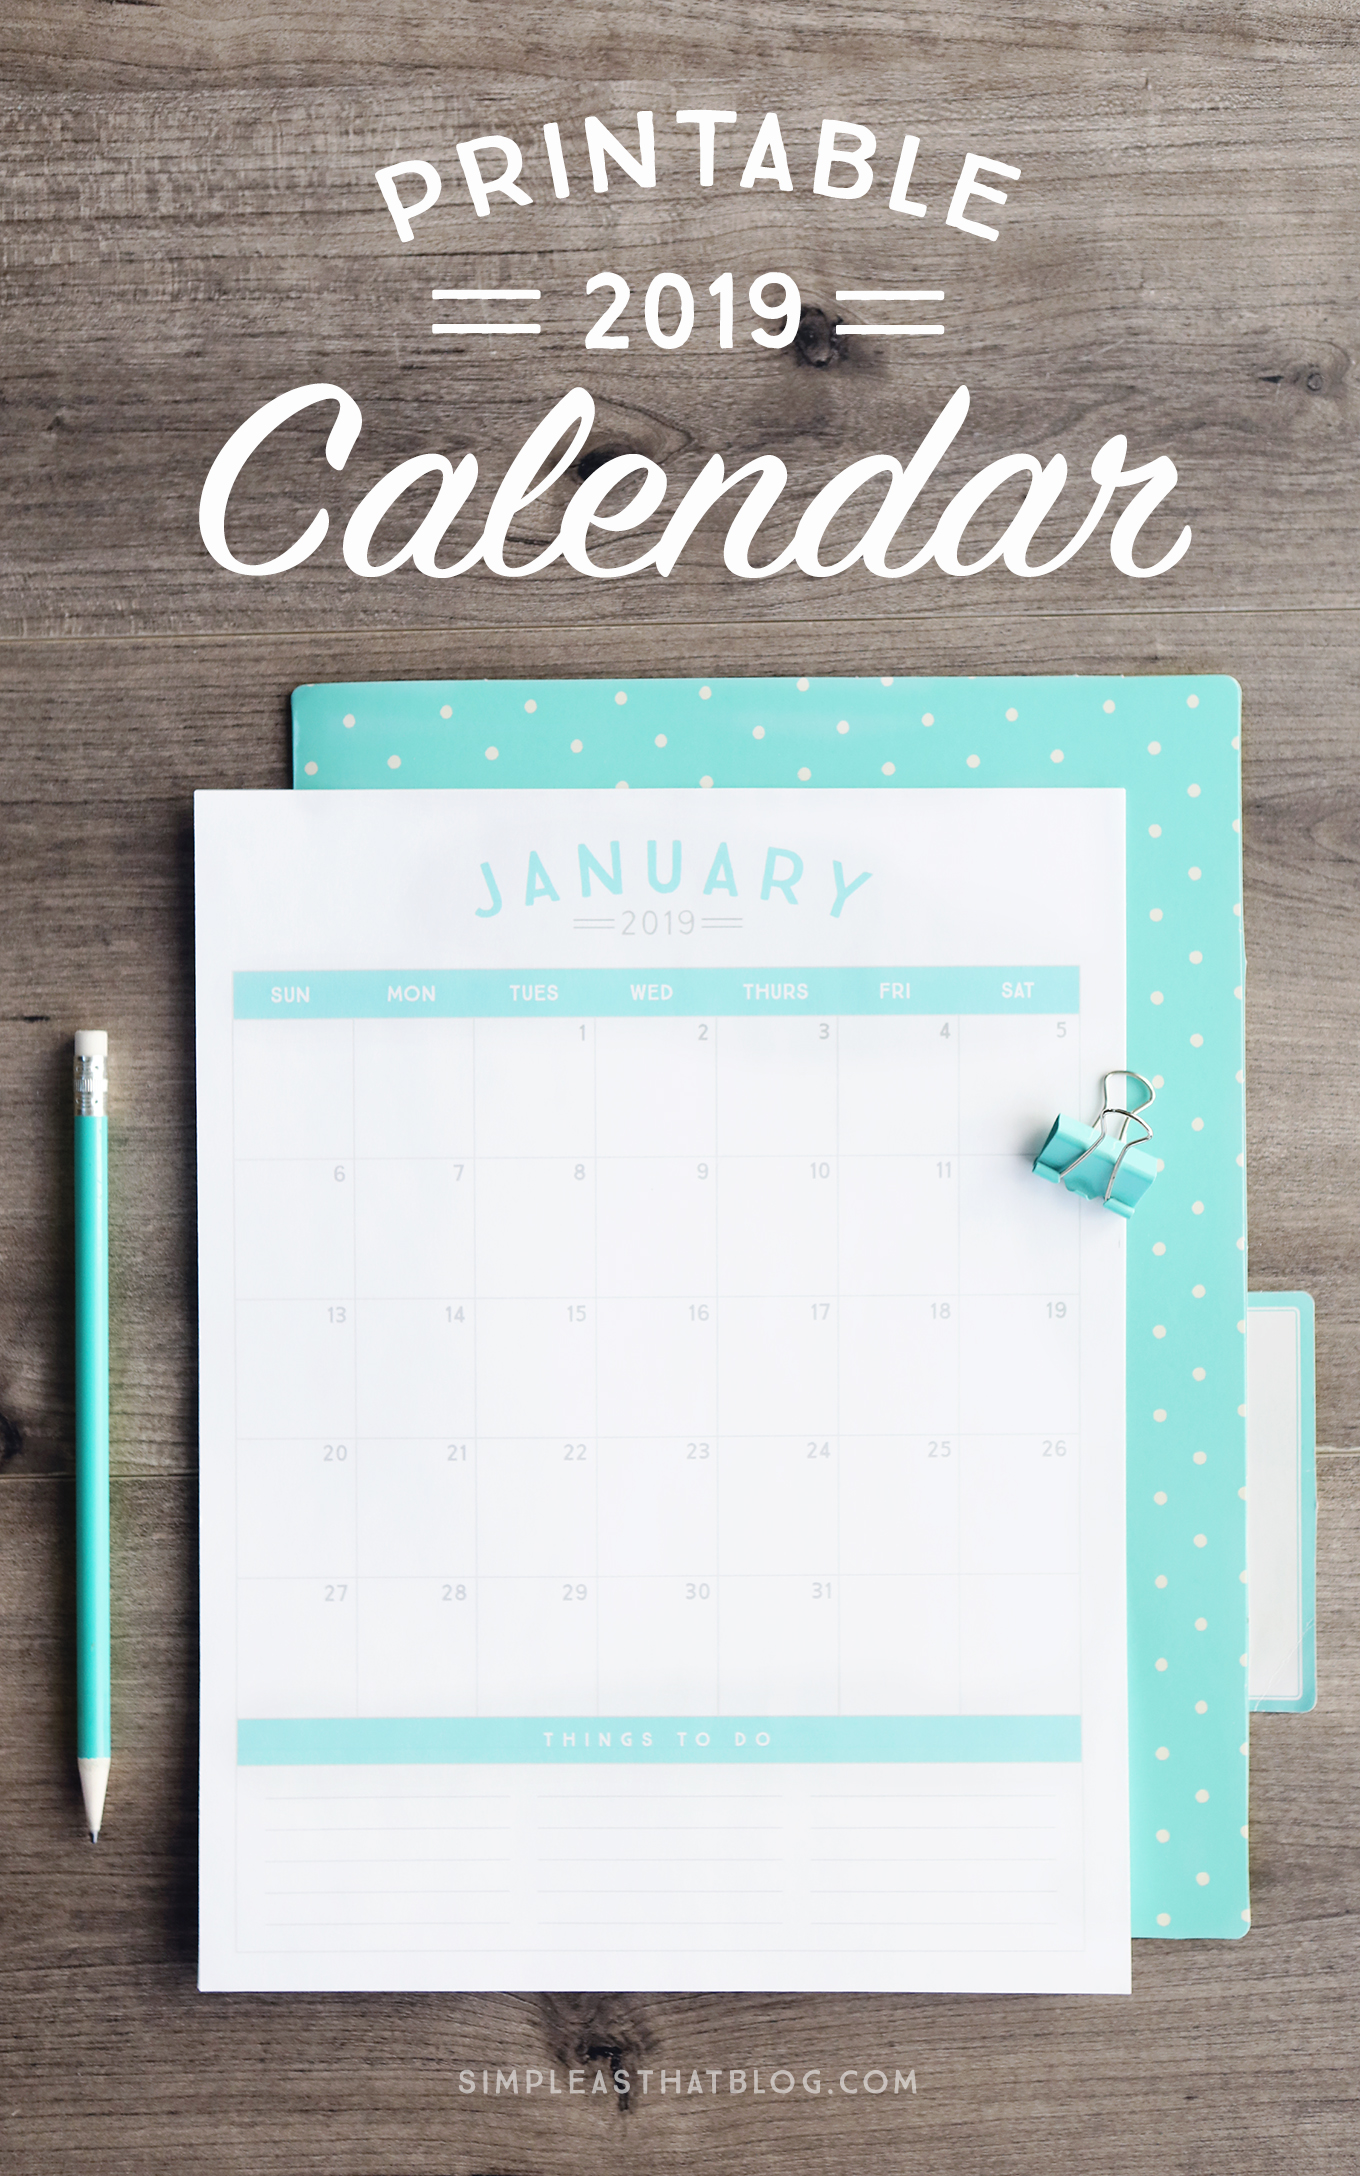 Get organized in the new year with a brand new 2019 printable calendar!